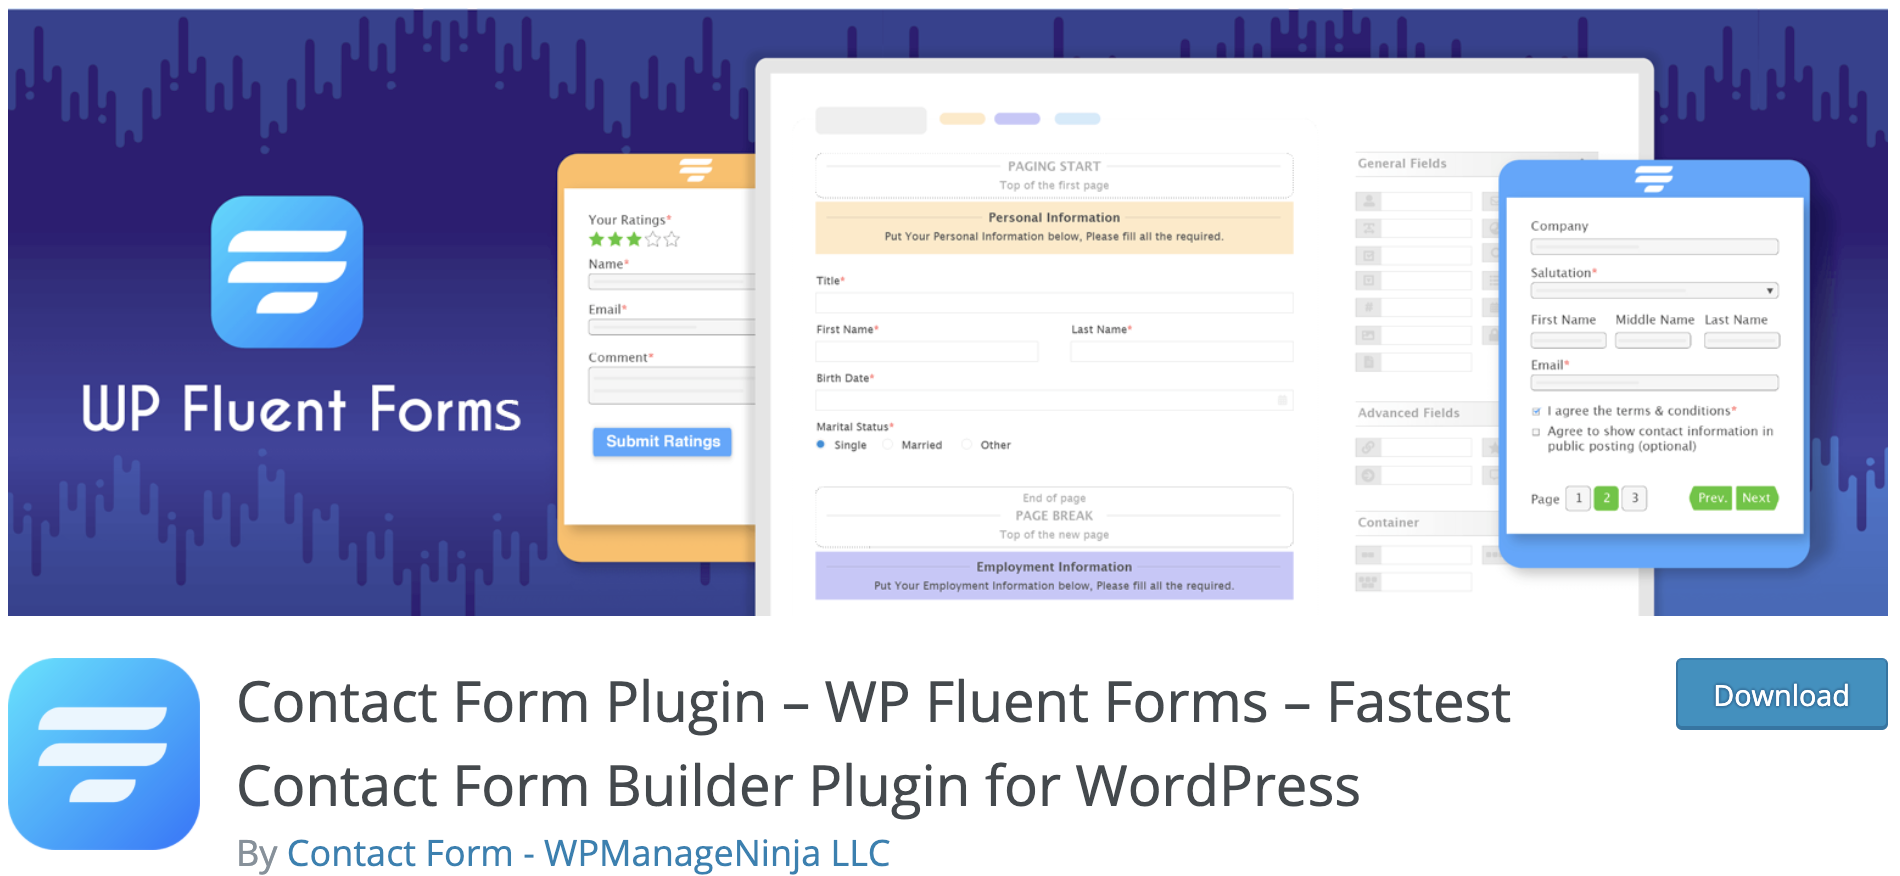 fluent forms payment solution plug in on wordpress